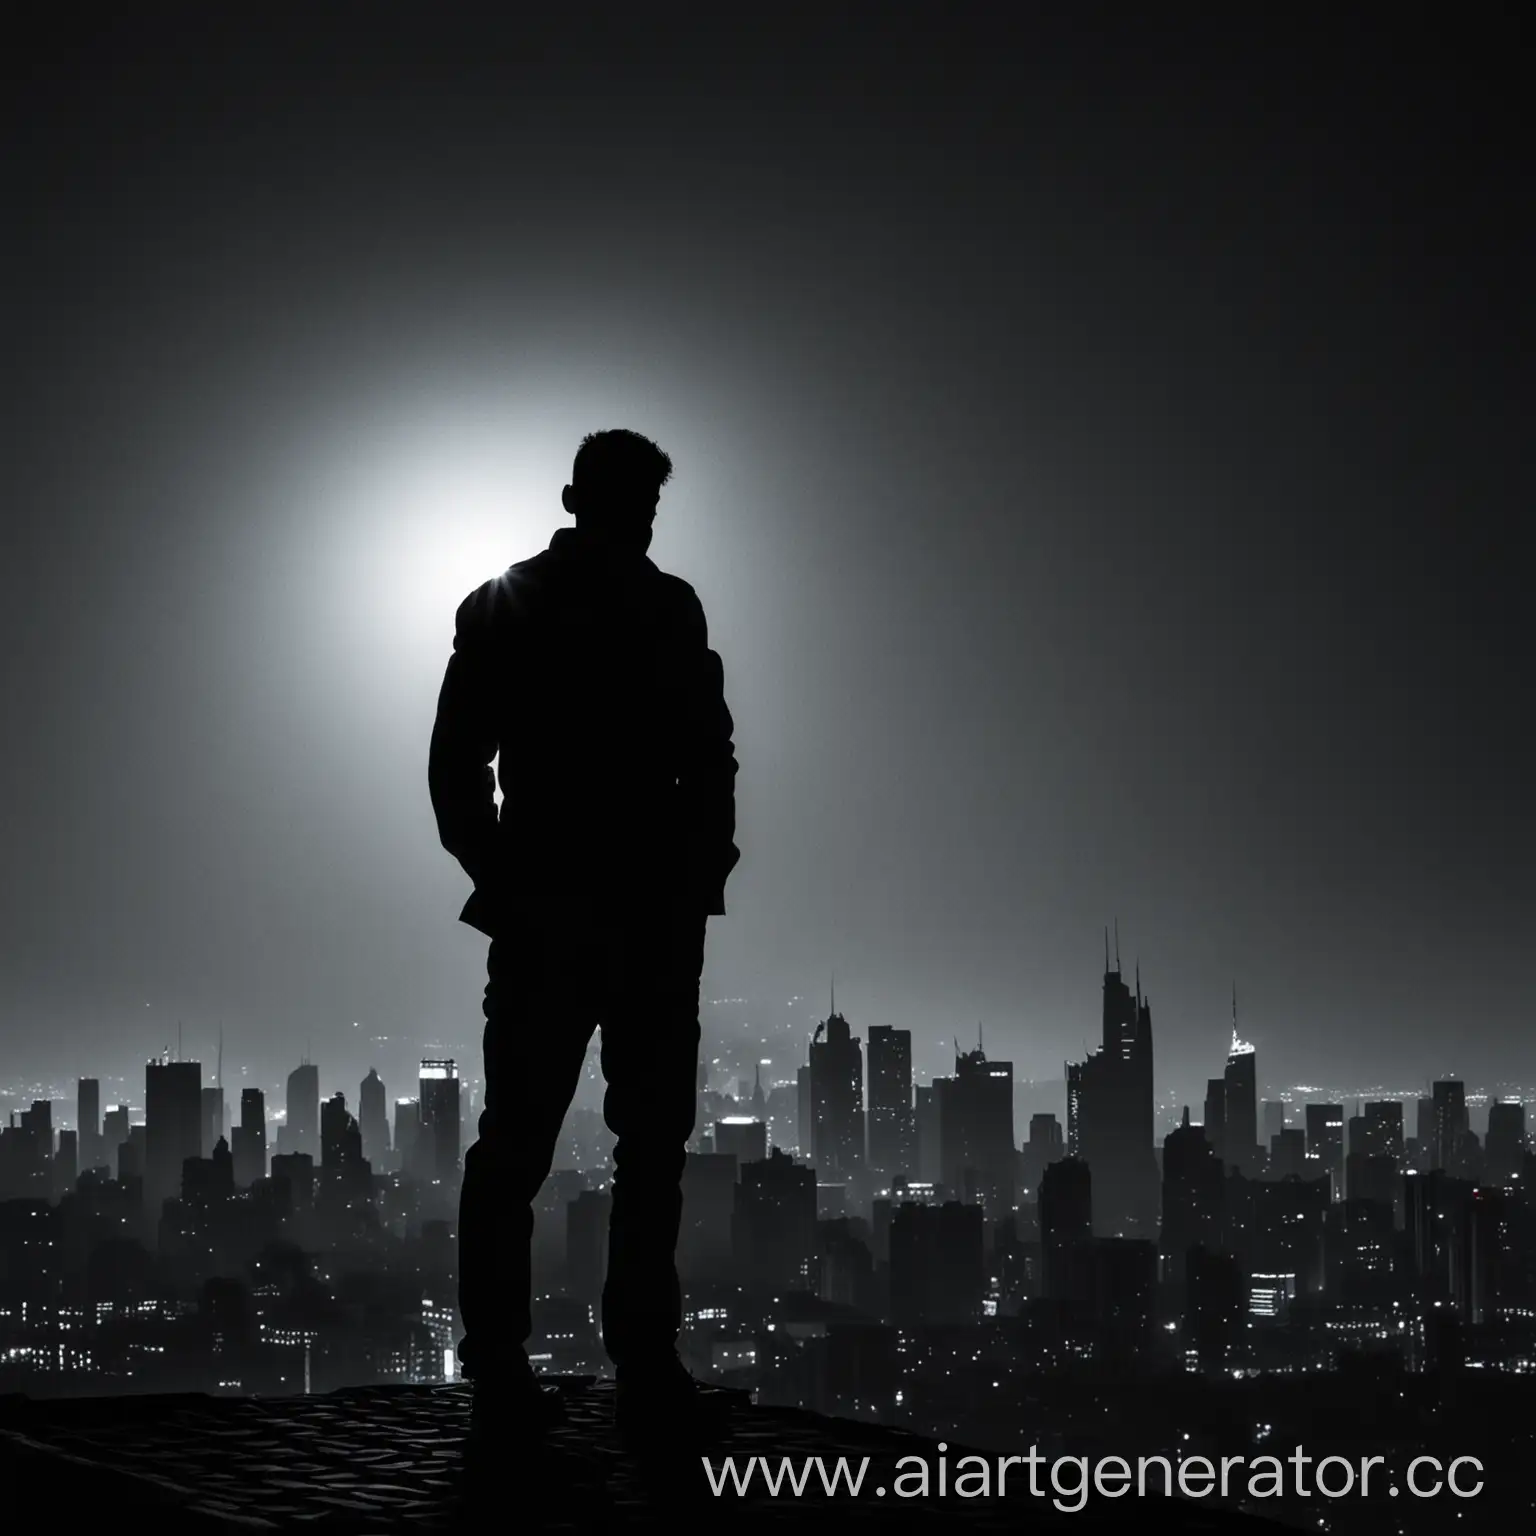 A black silhouette of a man standing on the roof with his back against the background of the night city